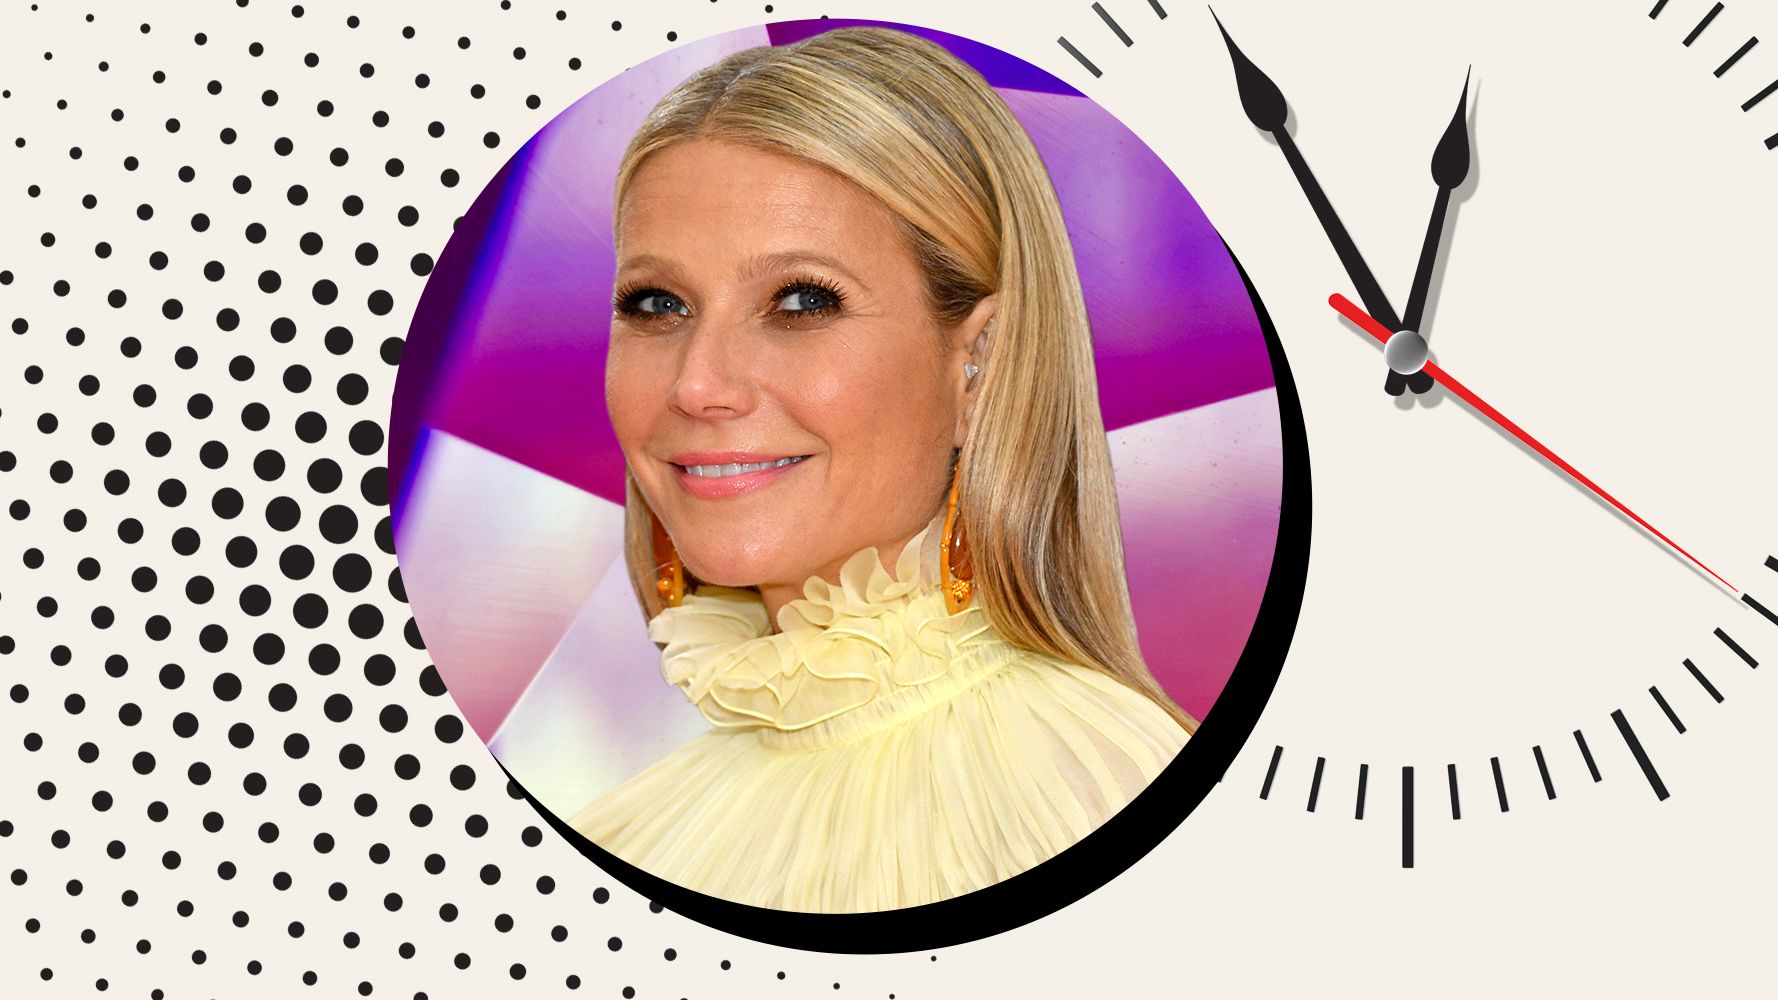 Learner fascisme serviet 24 Hours in Beauty with Gwyneth Paltrow | Marie Claire